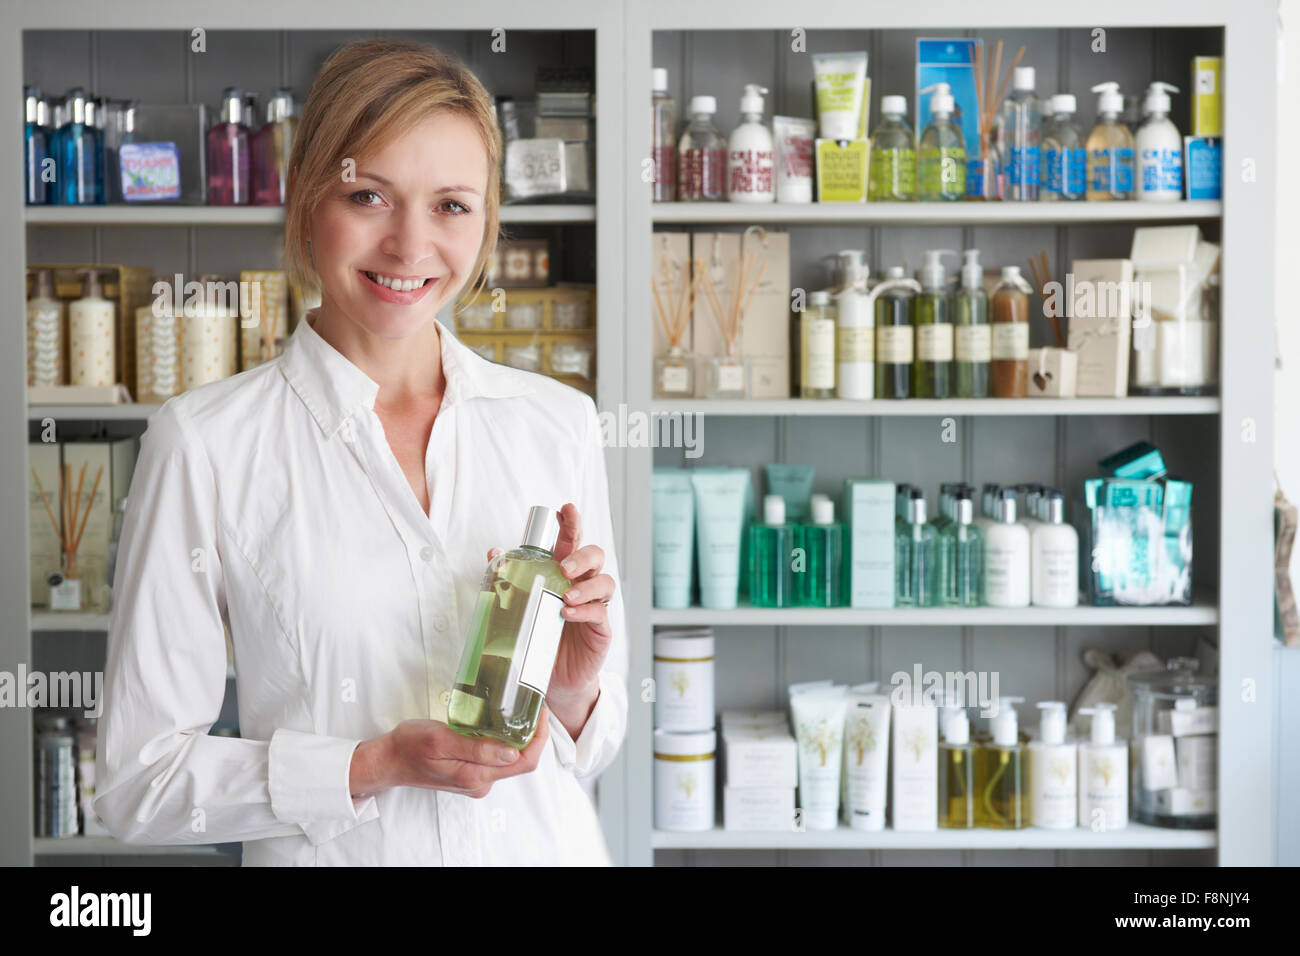 Beautician Advising On Beauty Products Stock Photo